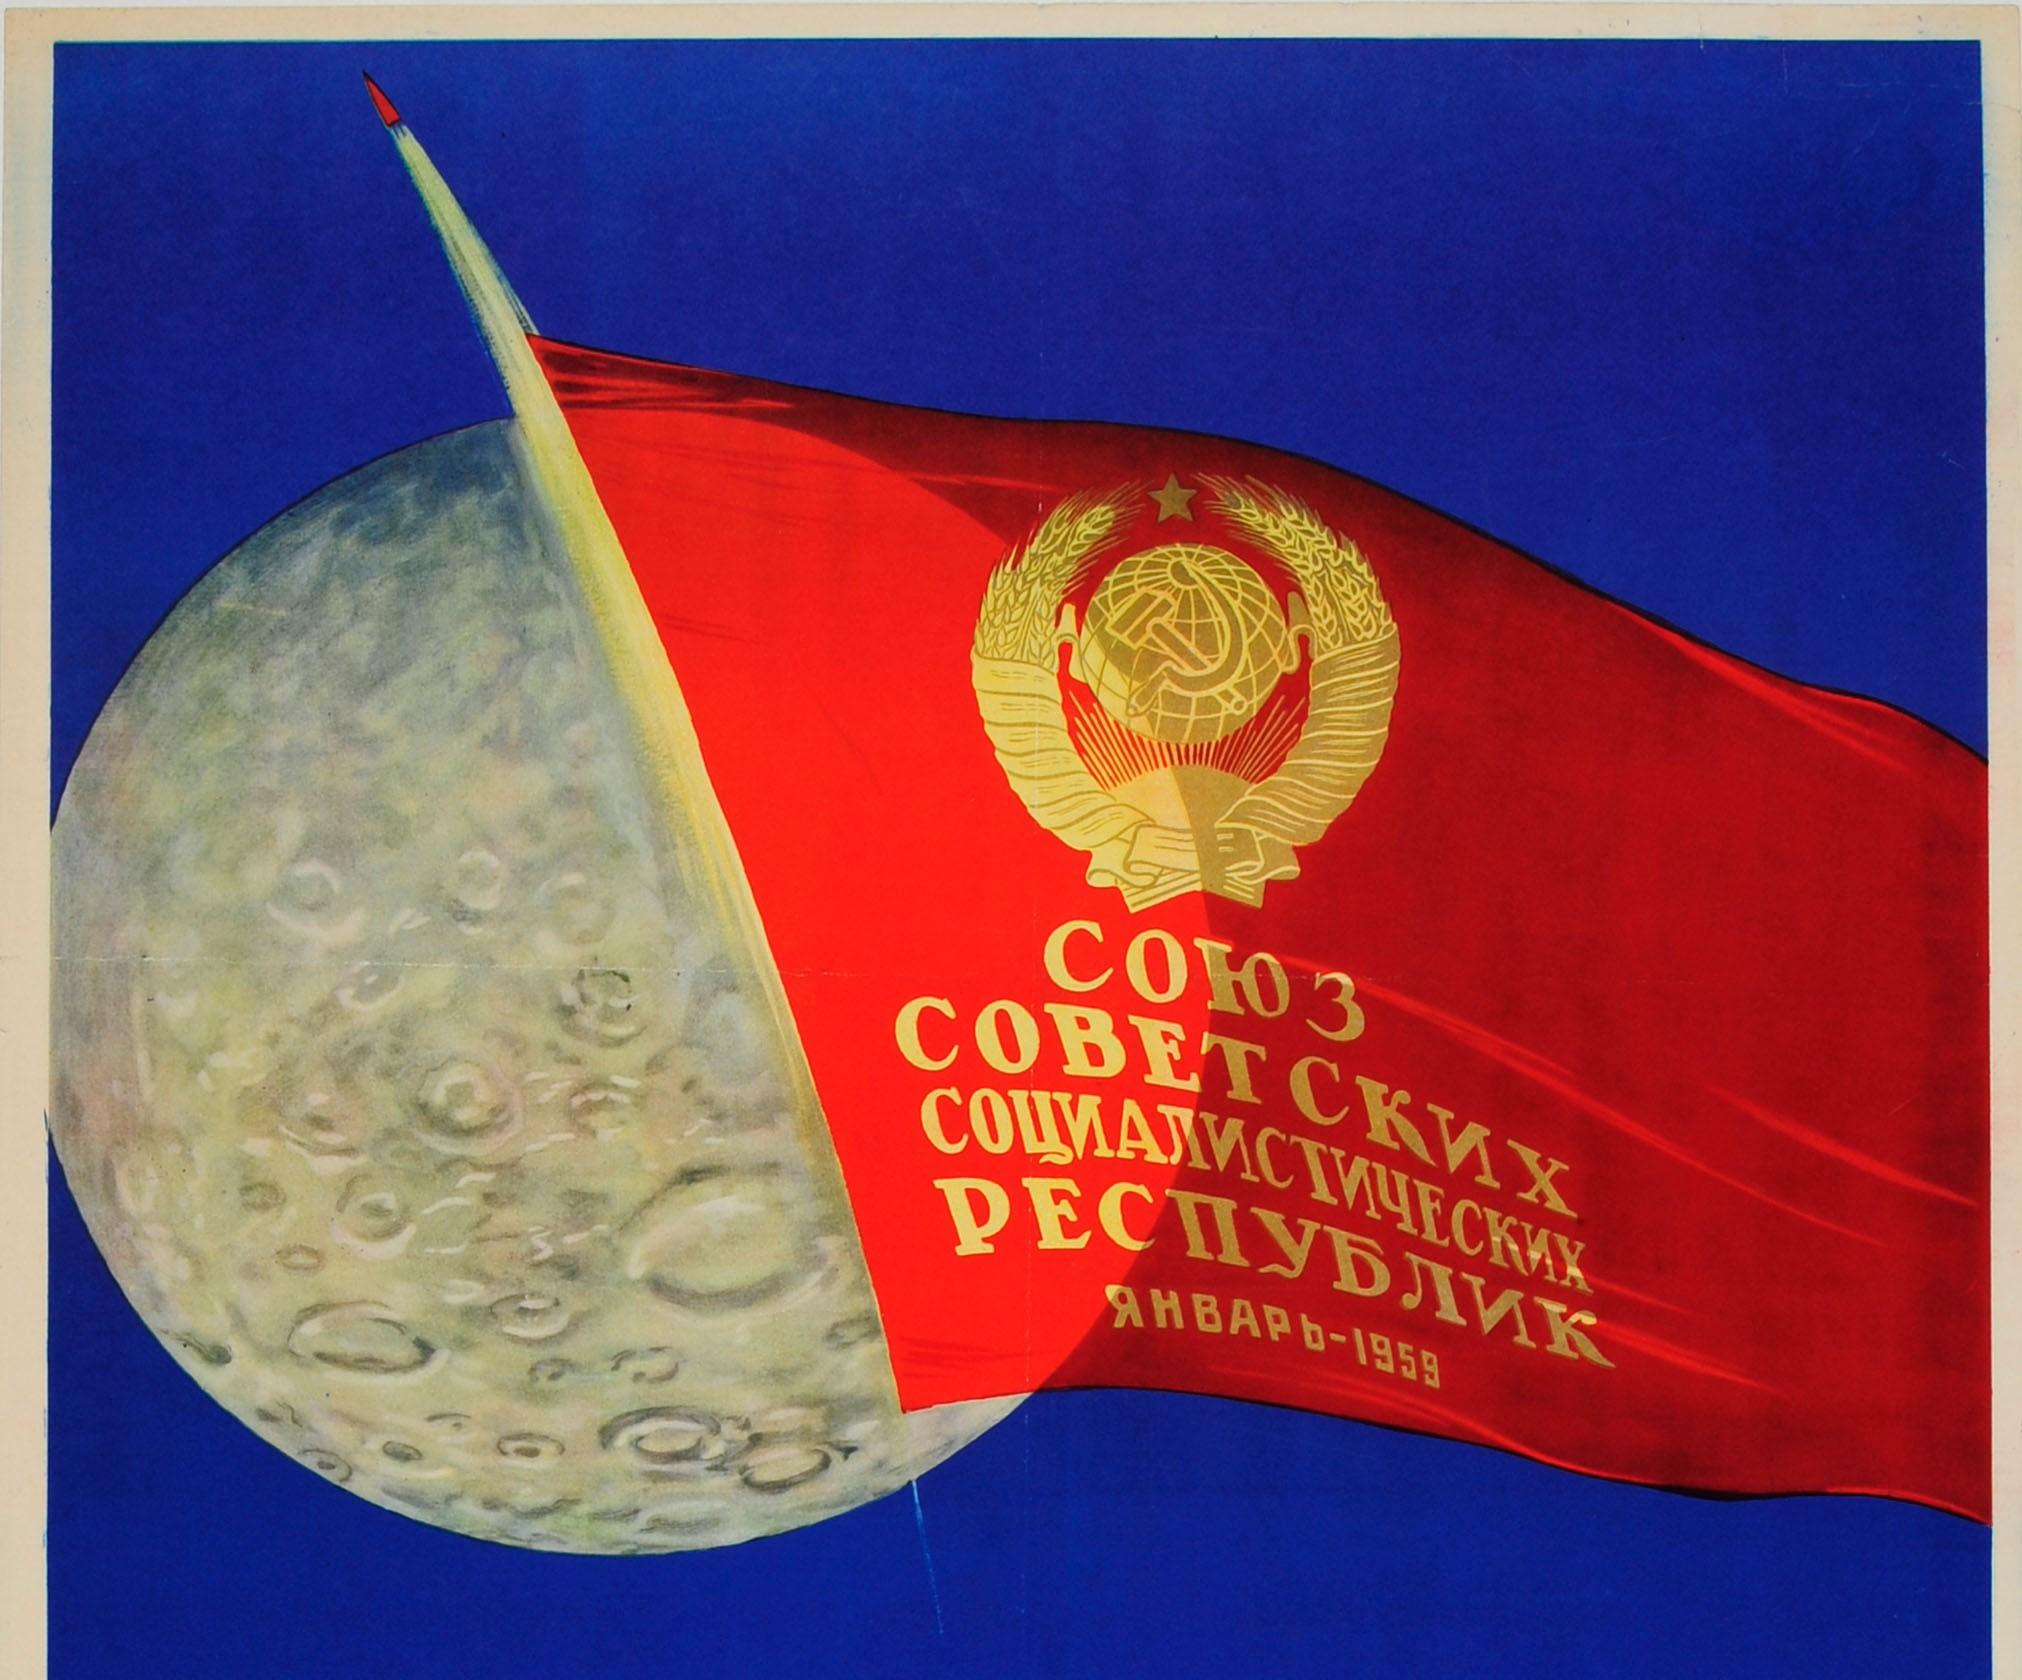 Original vintage Soviet propaganda poster - In the Glory of the Party, In the Glory of the People! - featuring a dynamic illustration depicting spotlights shining up from the USSR in red marked CCCP forming XXI up to space with a Soviet sputnik and